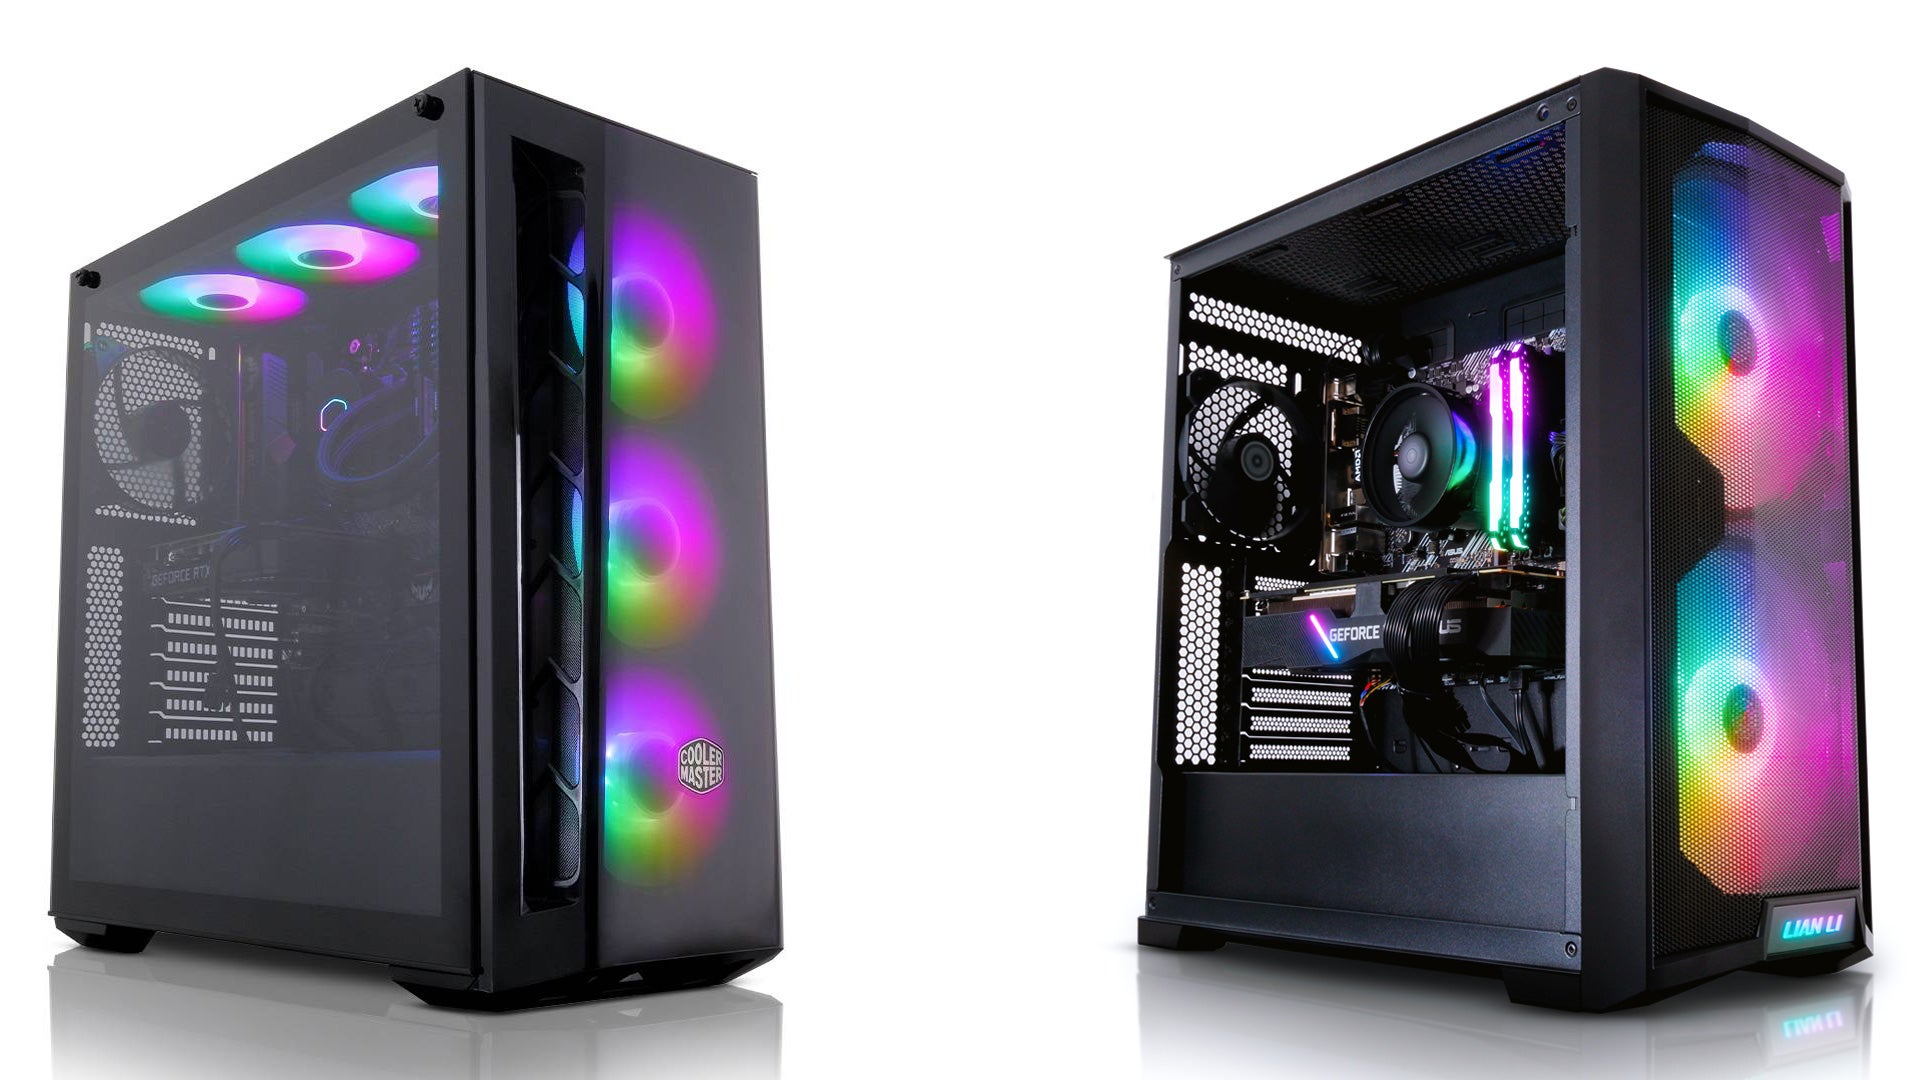 a pair of gaming pcs made by awd-it, featuring rtx 3070 ti graphics cards and plenty of RGB